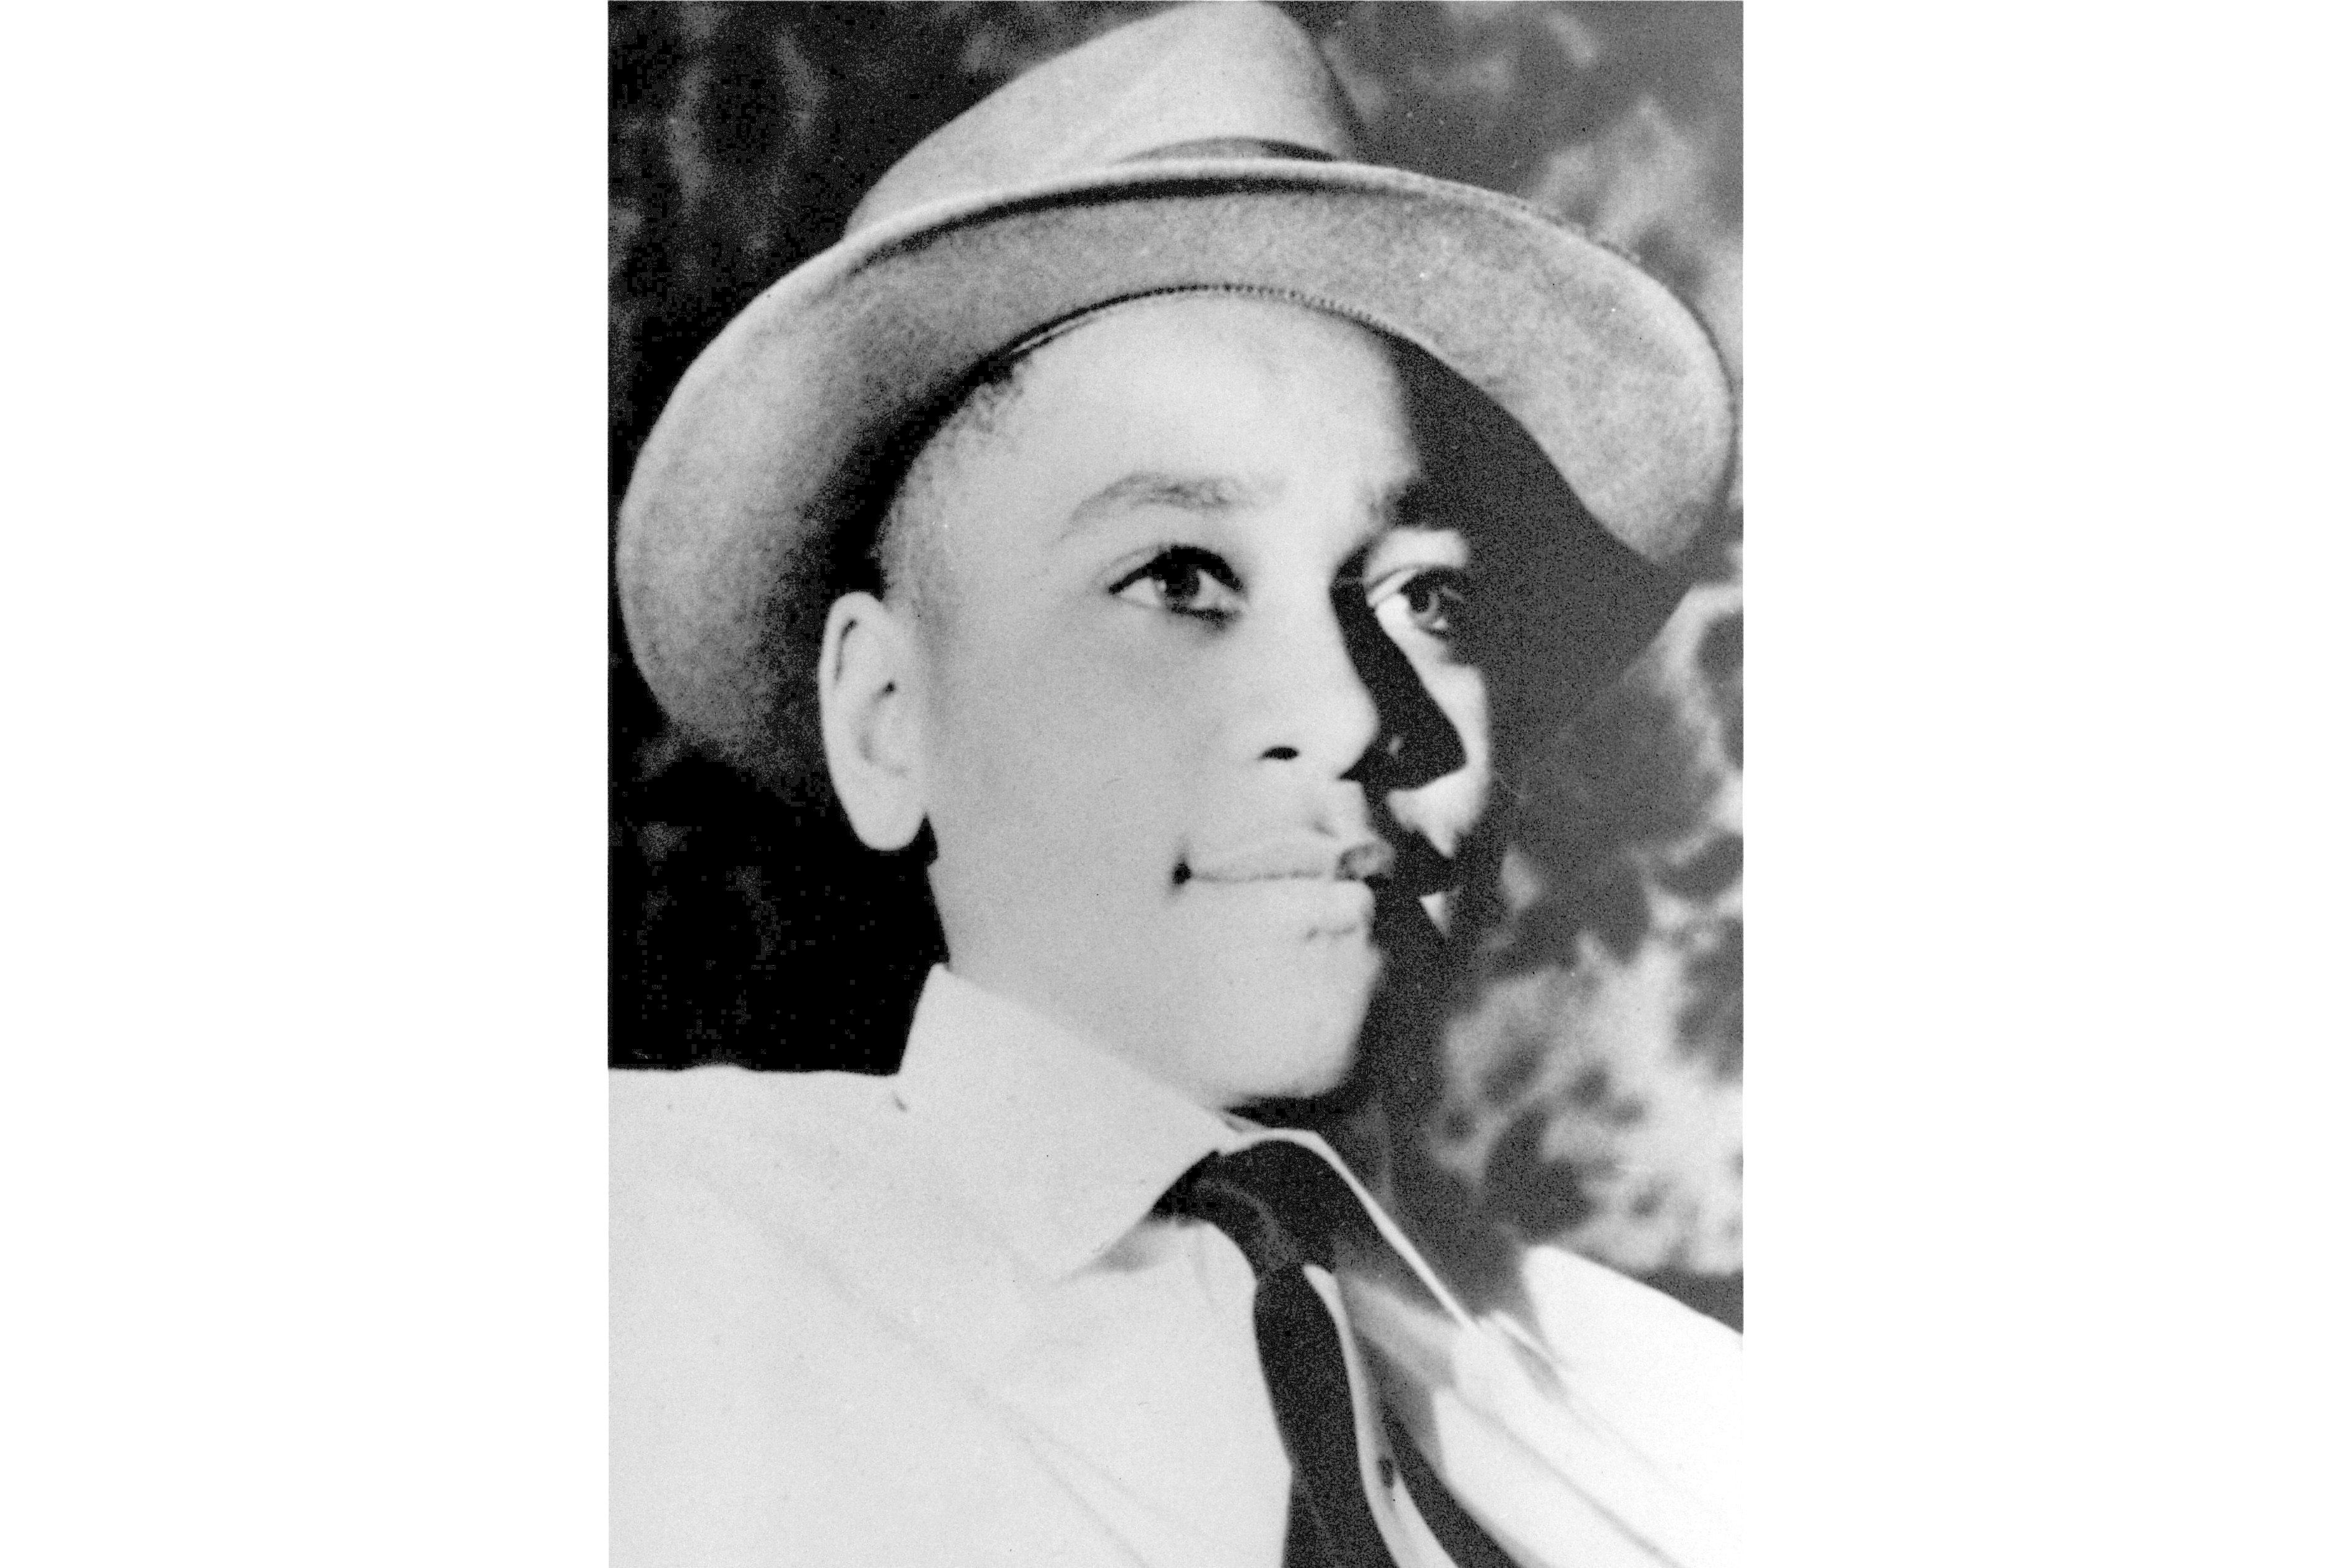 This undated file photo shows Emmett Till, a 14-year-old black Chicago boy, whose body was found in the Tallahatchie River near the Delta community of Money, Miss., on Aug. 31, 1955. The Senate has passed a bill to award posthumously the Congressional Gold Medal to Emmett Till, the Chicago teenager murdered by white supremacists in the 1950s, and his mother Mamie Till-Mobley. She insisted on an open casket funeral to demonstrate the brutality of his killing. 